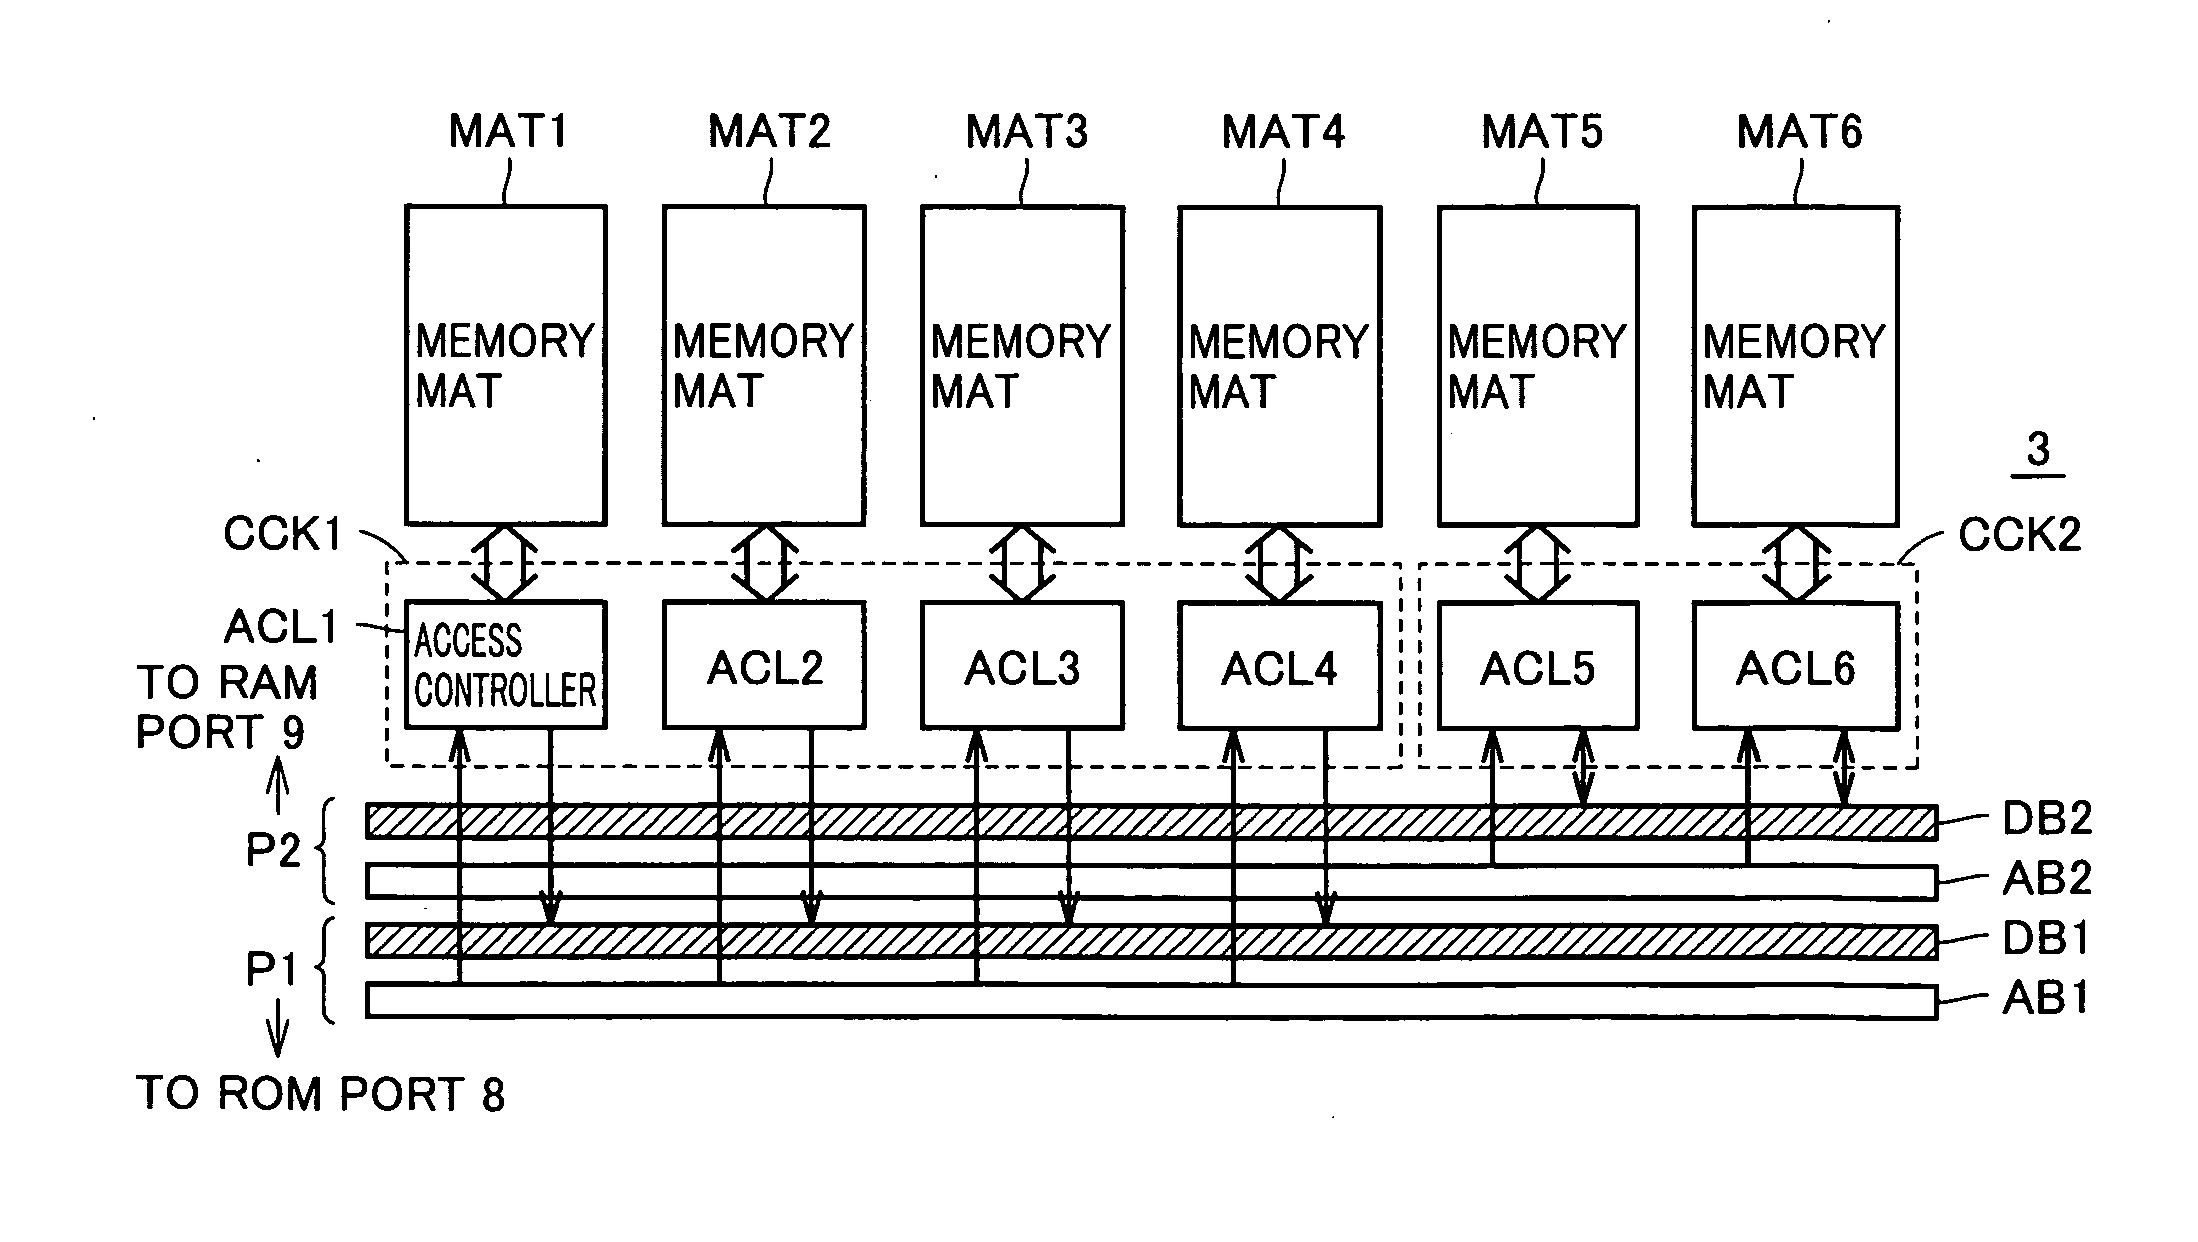 Semiconductor memory device, operational processing device and storage system